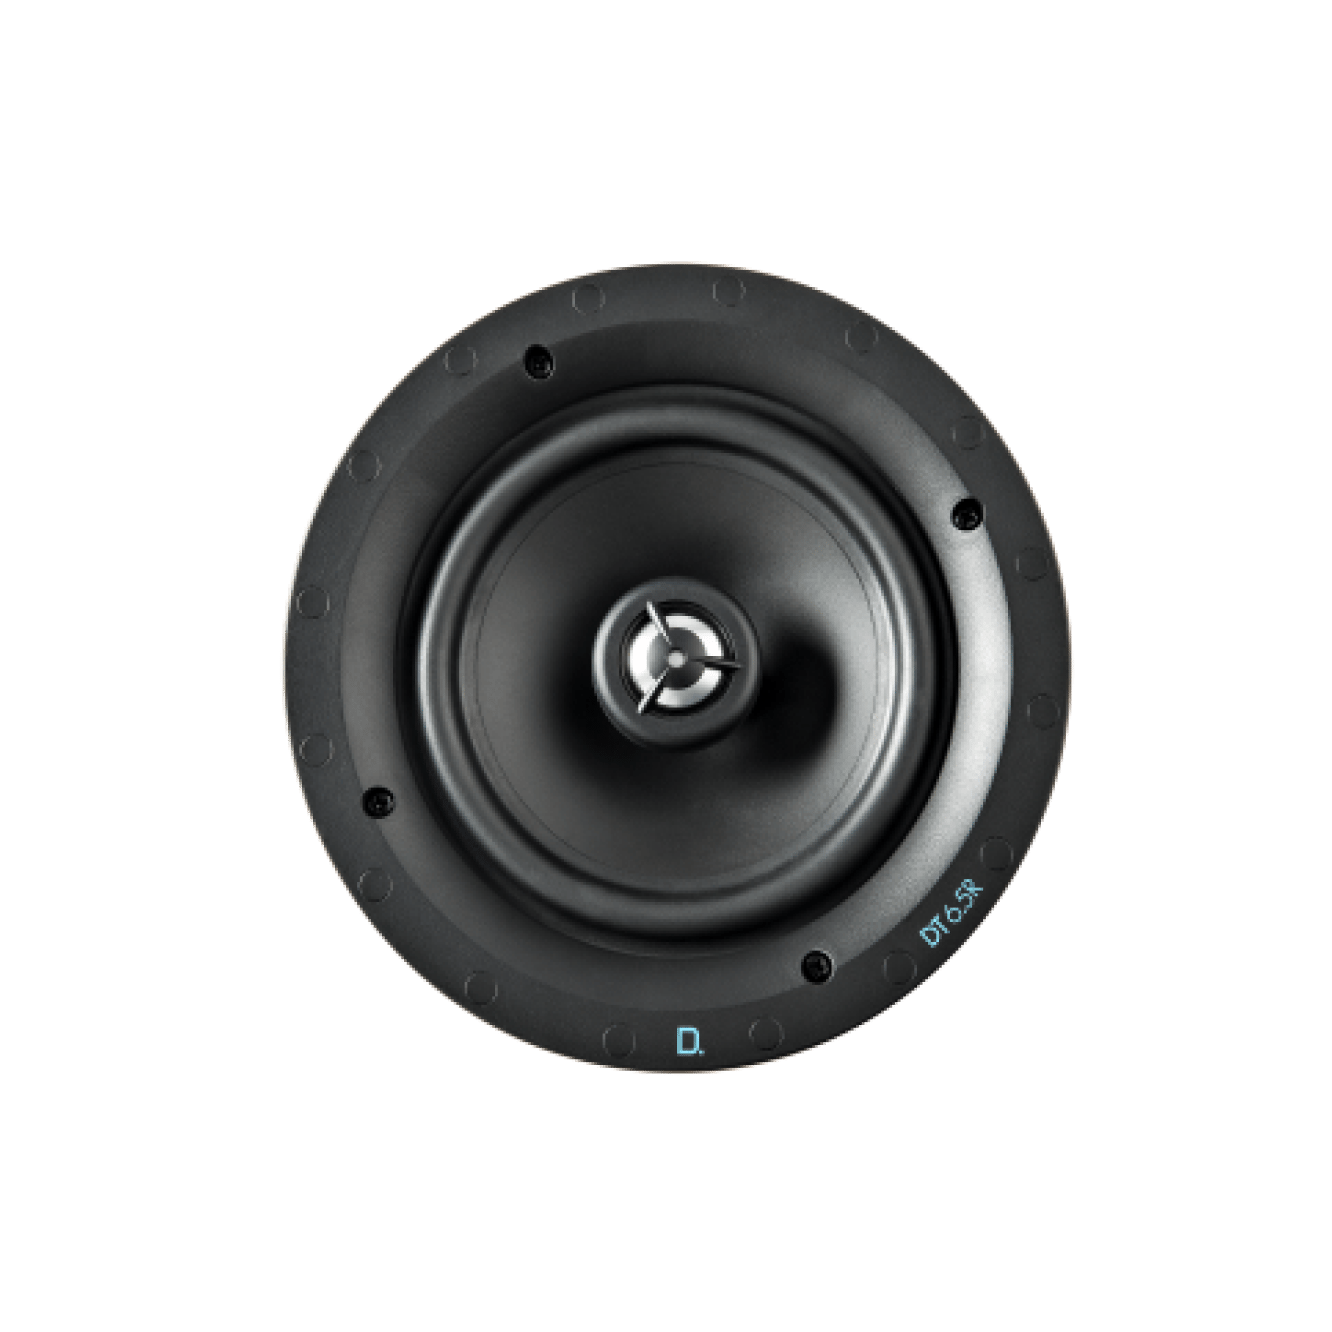 Definitive Technology DT Custom Install Series Round 6.5" In-Ceiling Speakers